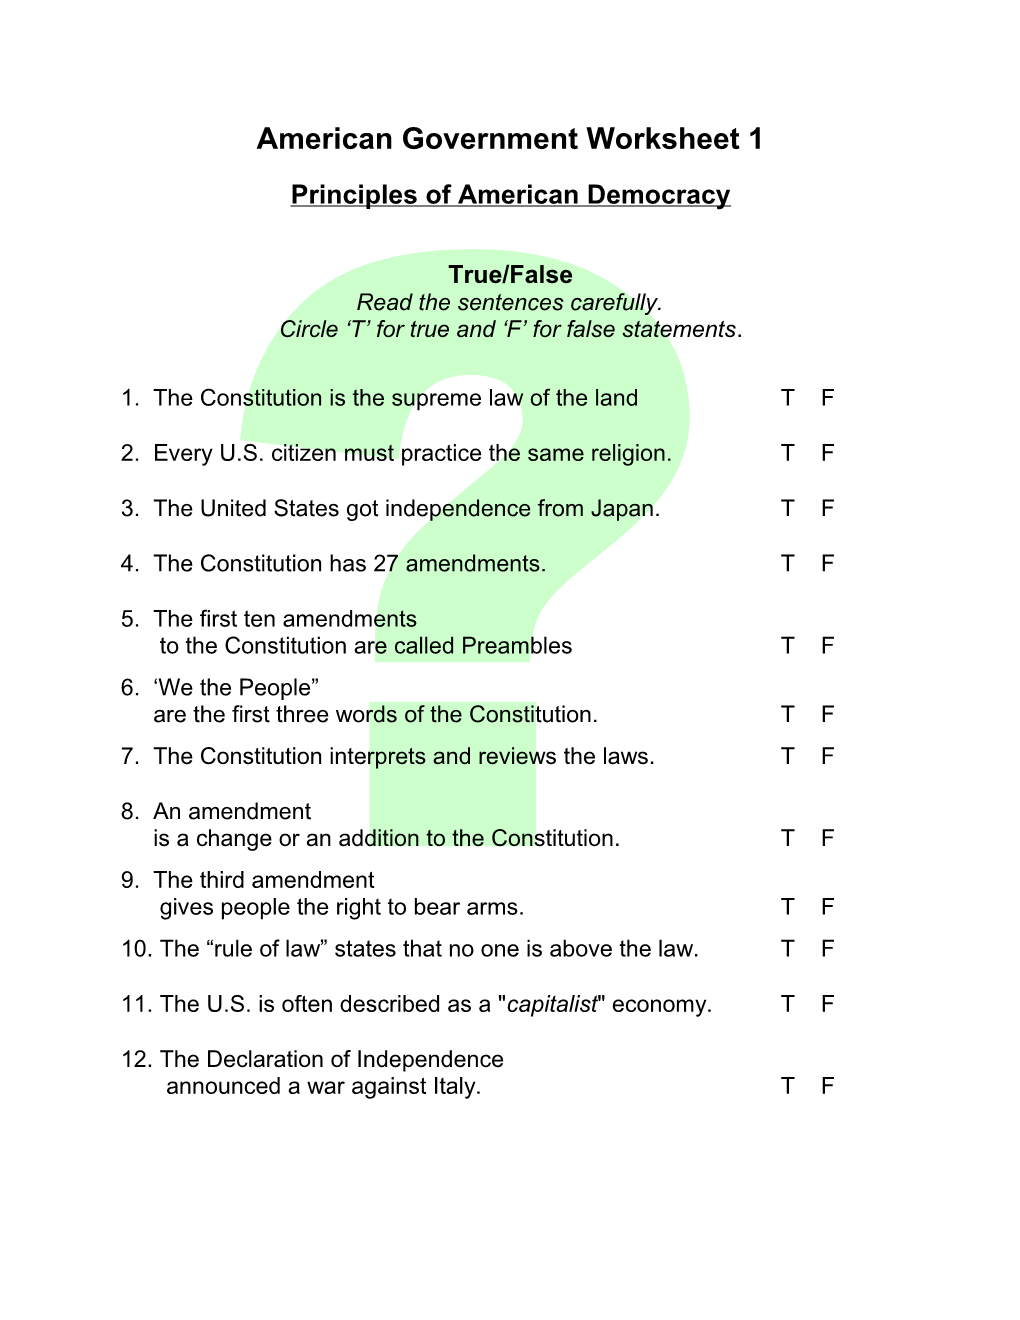 American Governmentworksheet 1